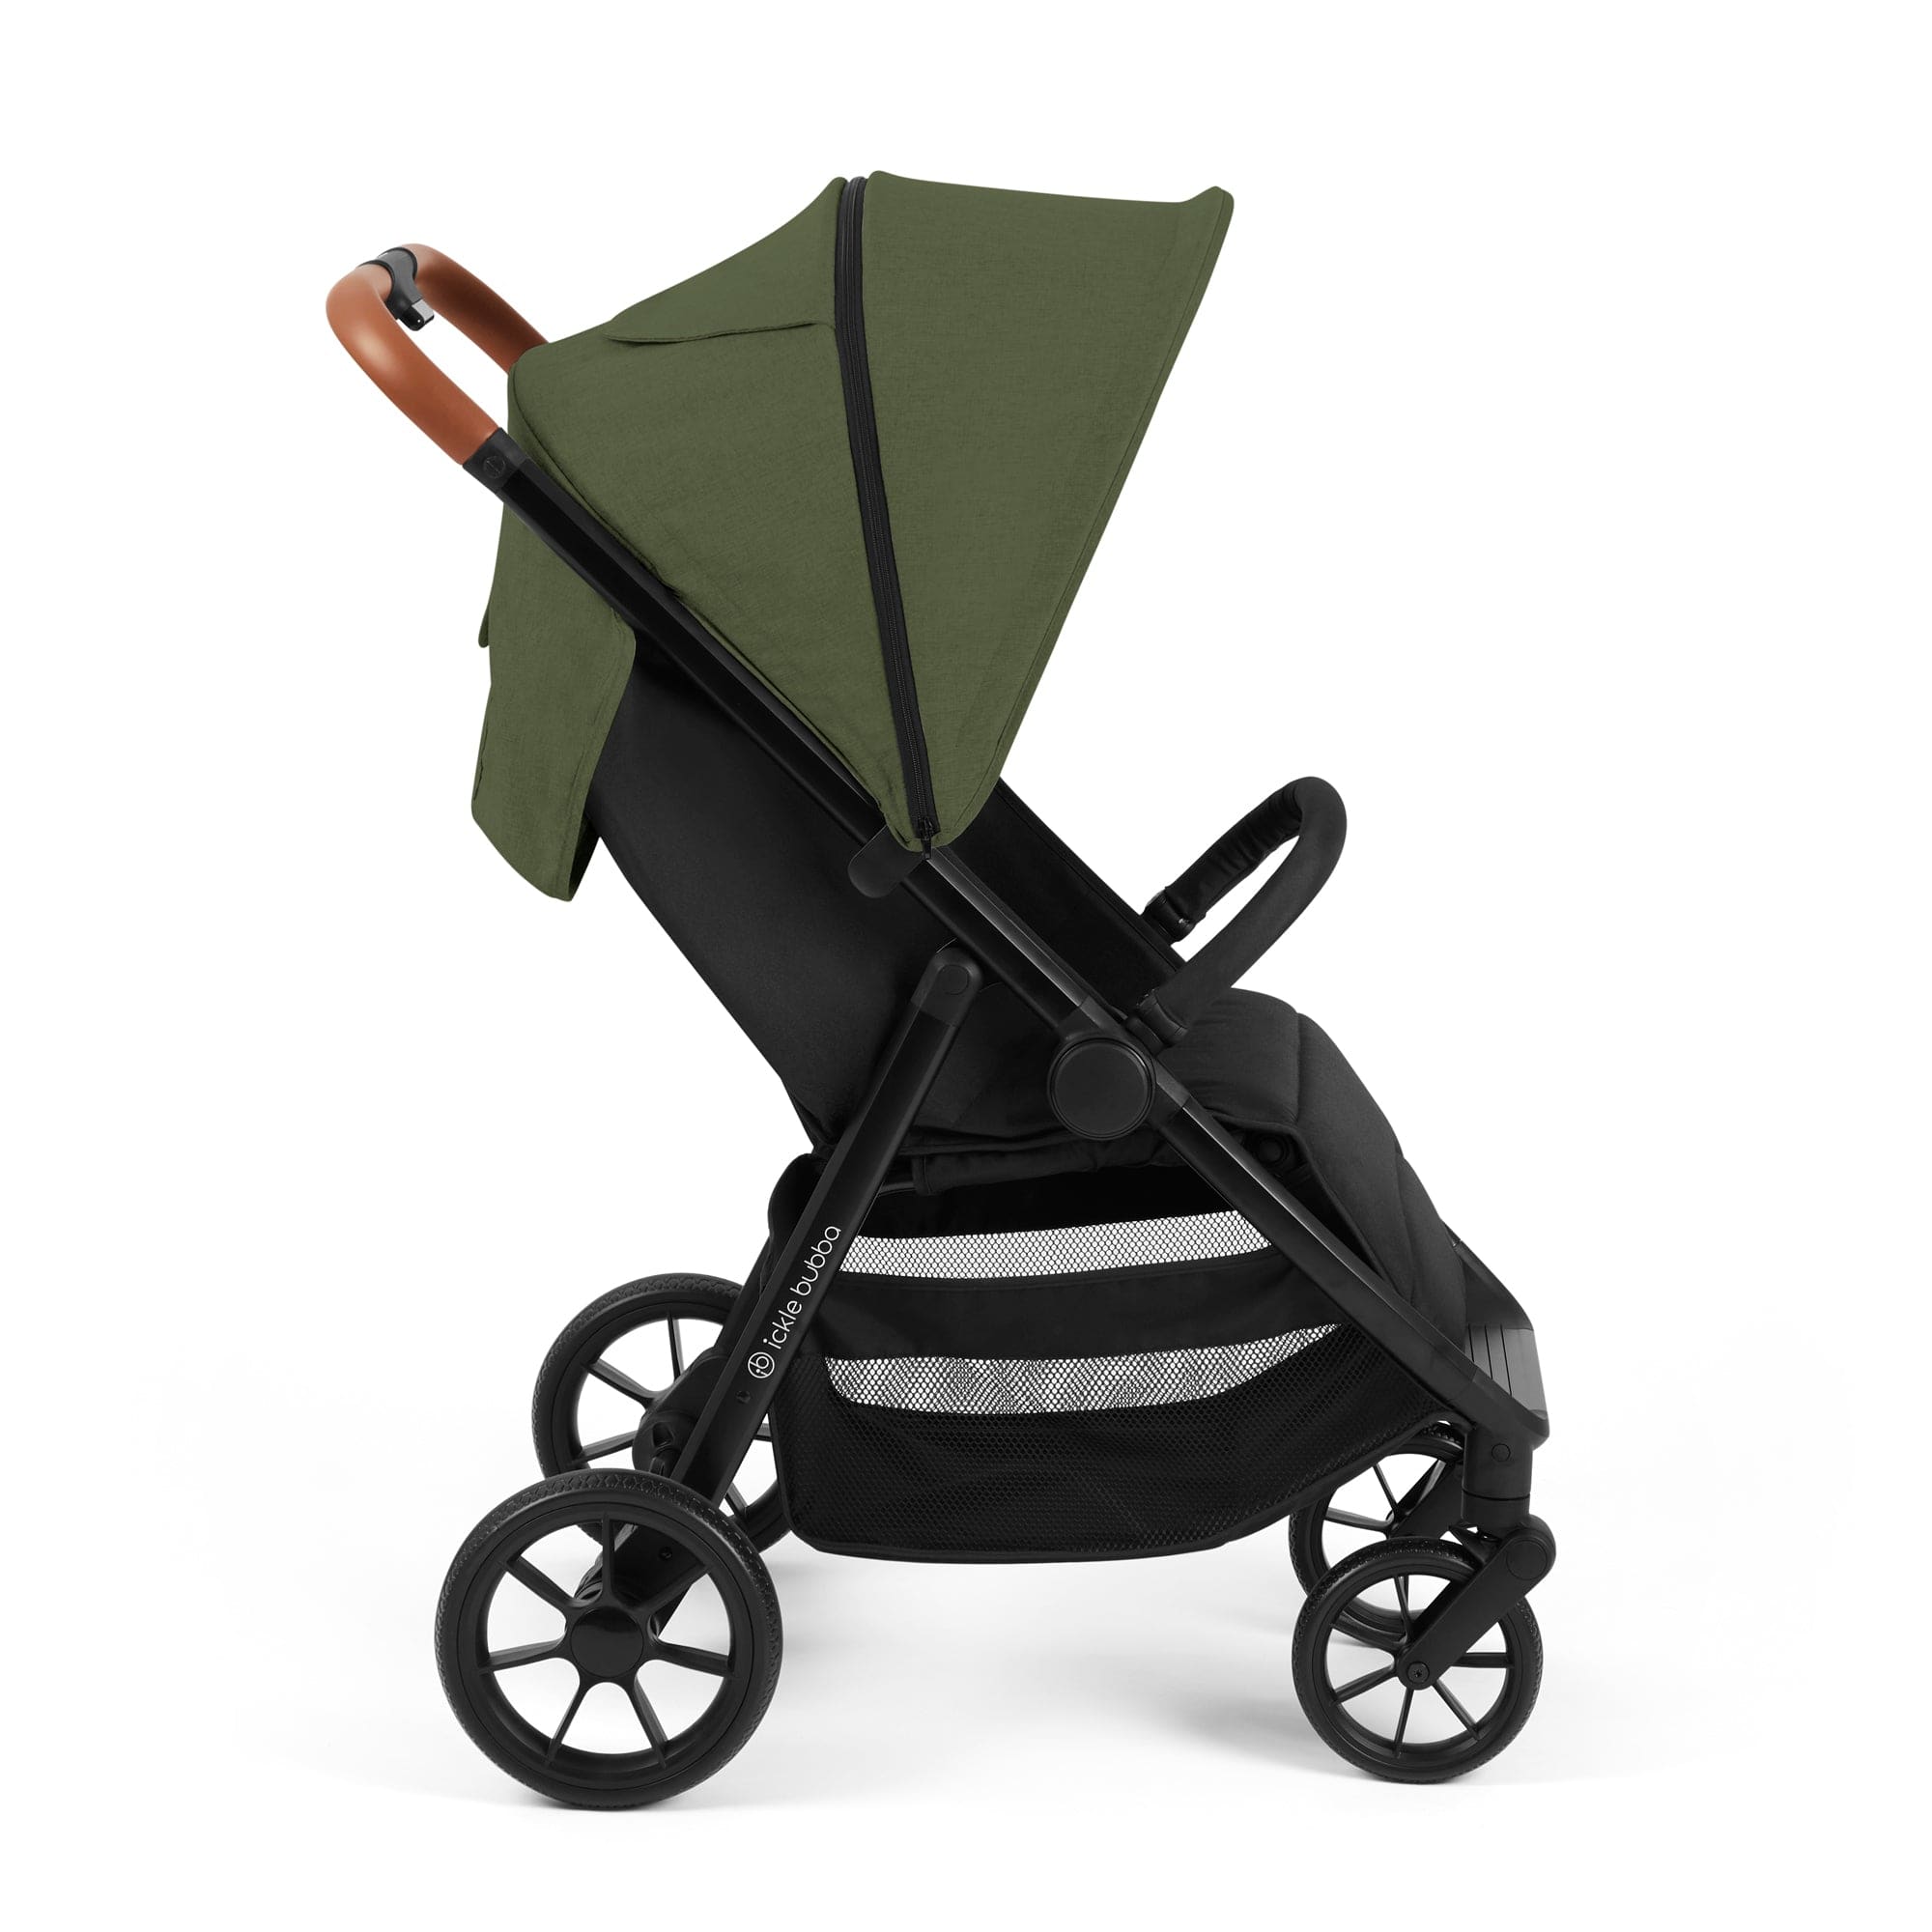 STOMP STRIDE PRIME STROLLER in Woodland Pushchairs & Buggies 15-006-300-066 5056515033953